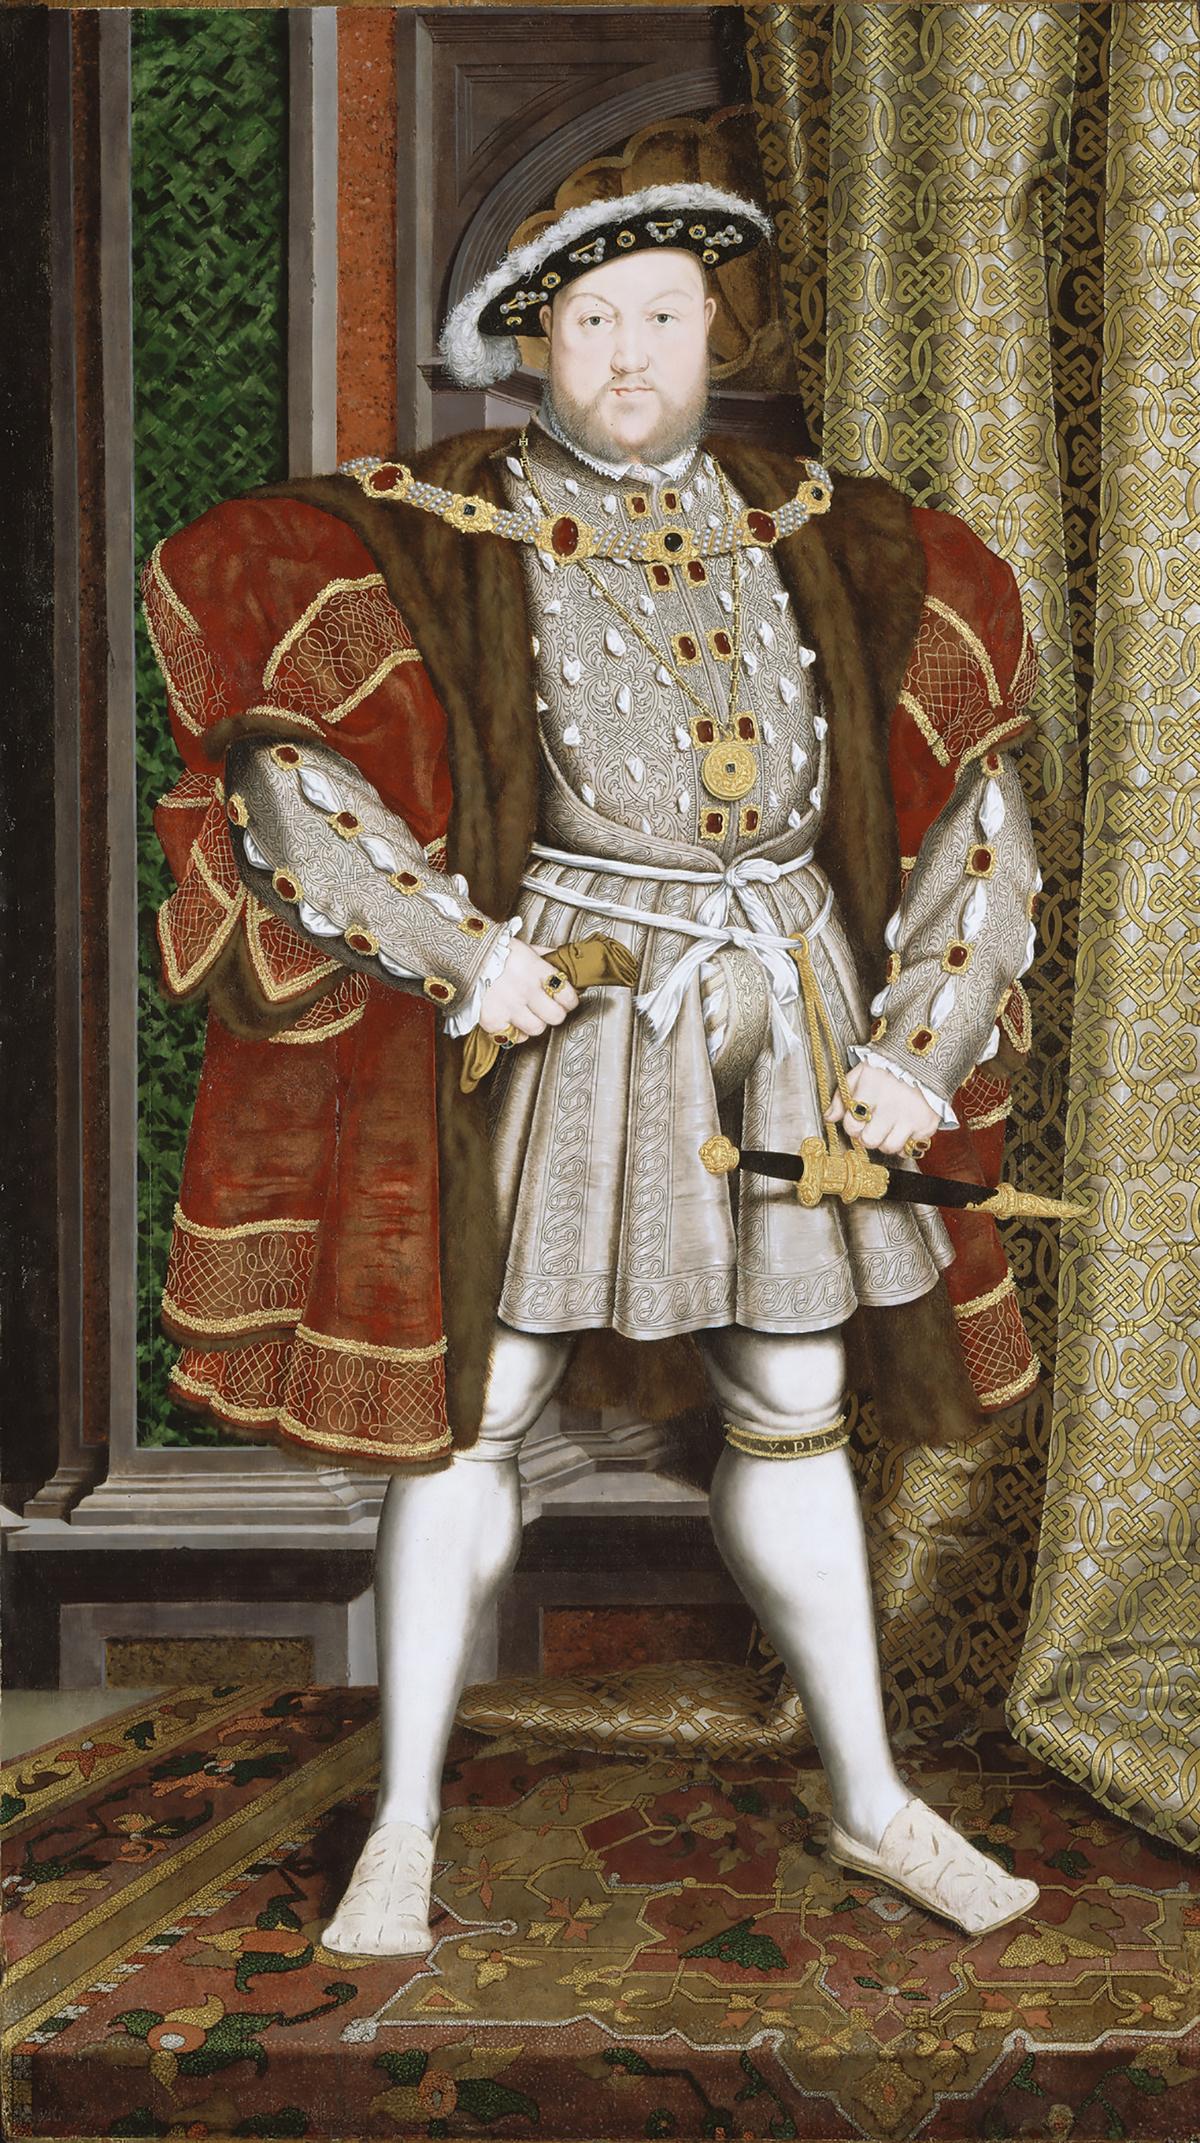 “Henry VIII,” circa 1540, Workshop of Hans Holbein the Younger. Oil on panel, 94 1/8 inches by 52 15/16 inches. Walker Art Gallery, National Museums Liverpool. (Courtesy of Cleveland Museum of Art)